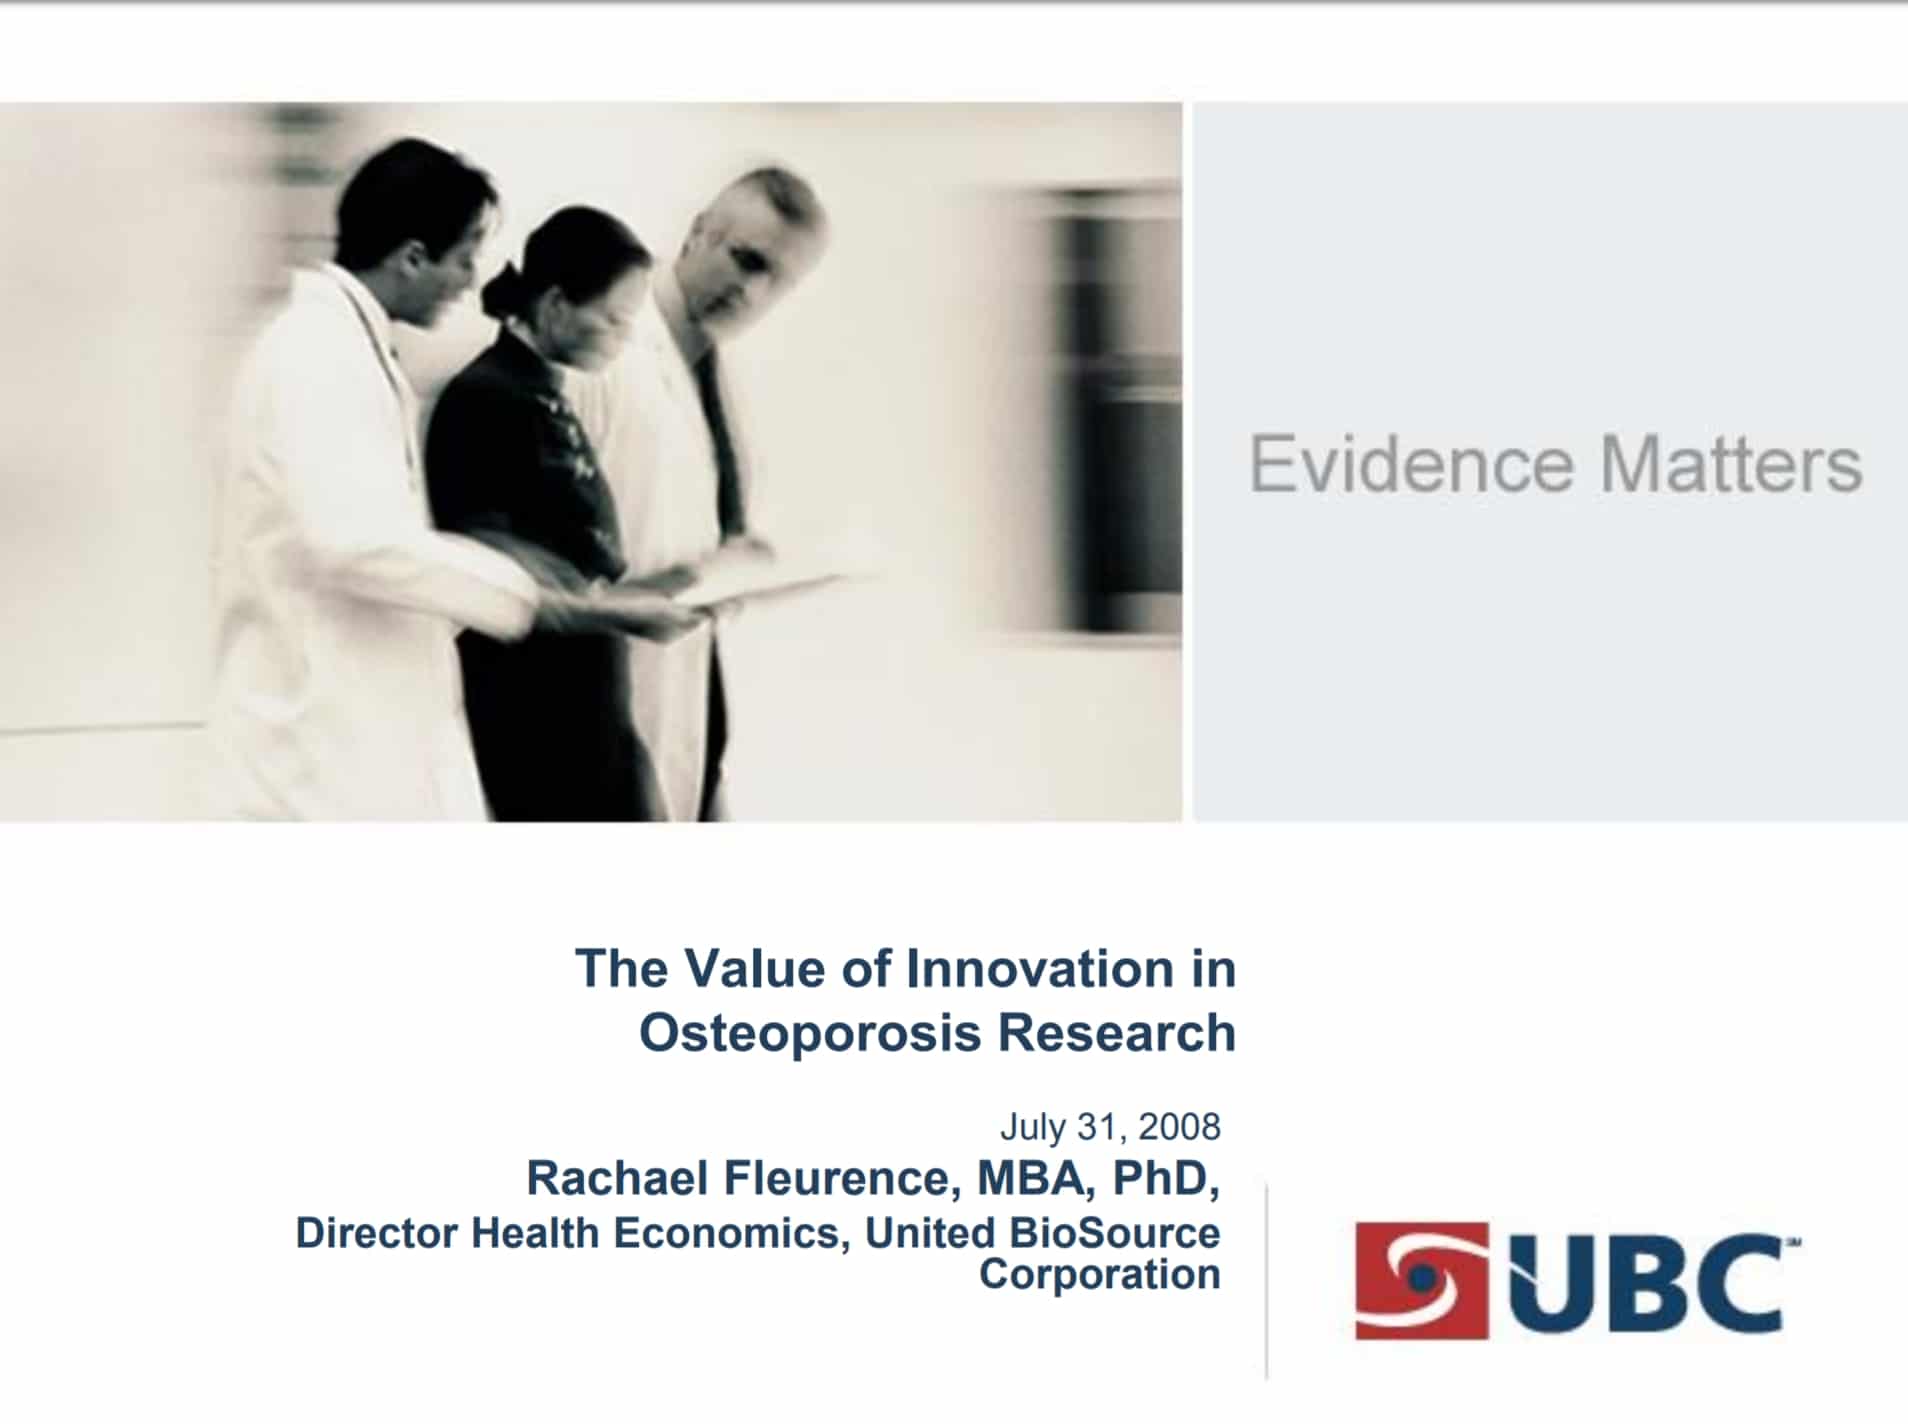 "Value of Innovation in Osteoporosis" presentation cover.